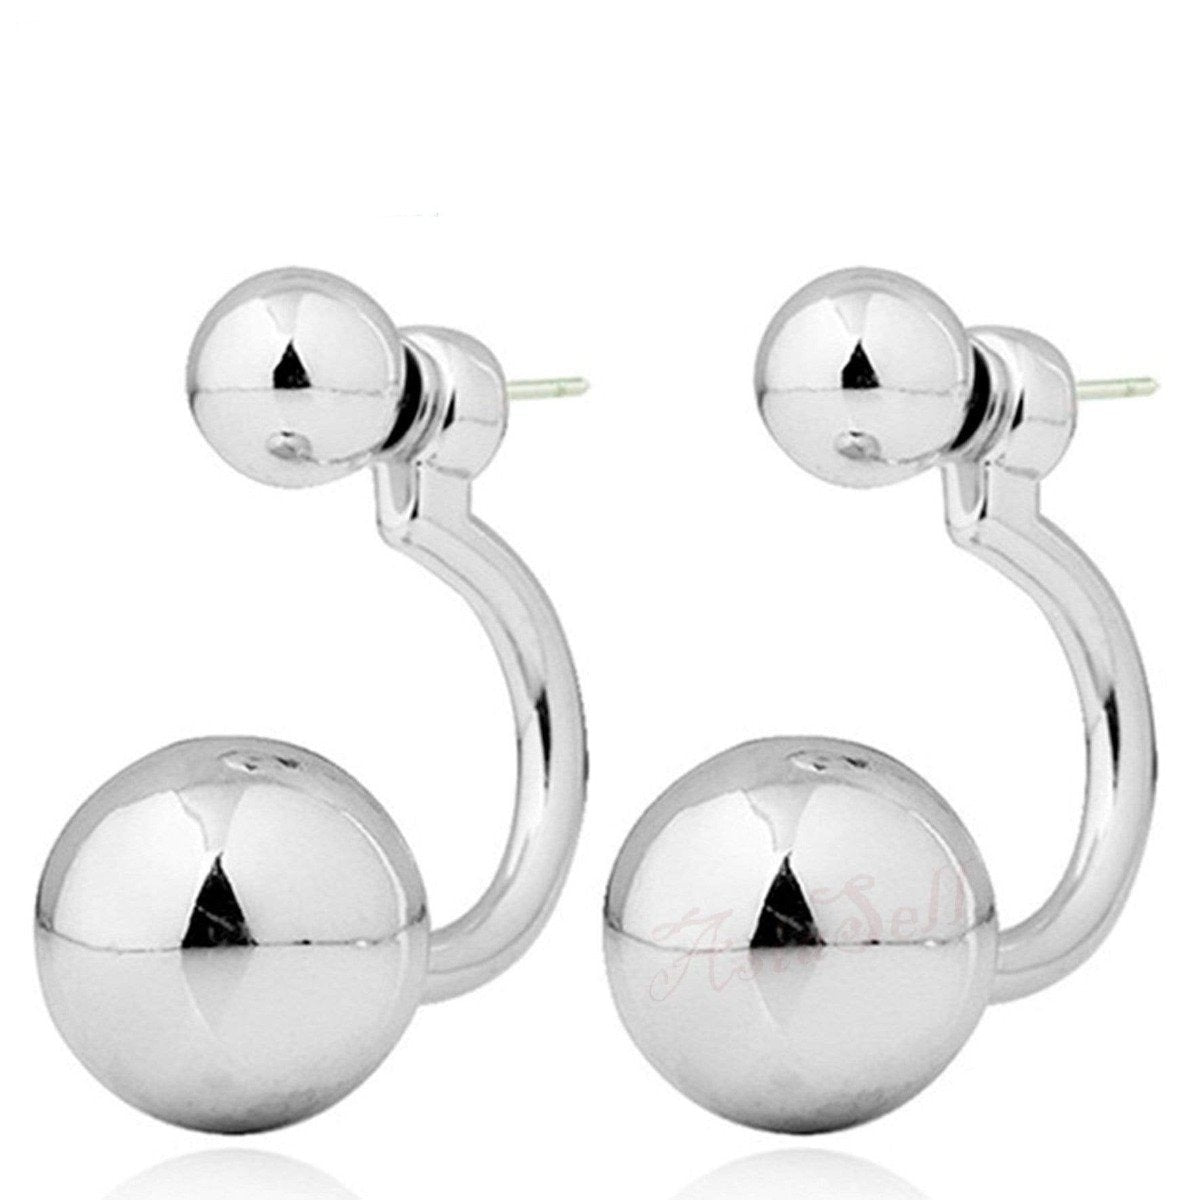 Gorgeous Round Double Earrings Womens Lovely Charm Ball Stud Earring Beautiful Silver